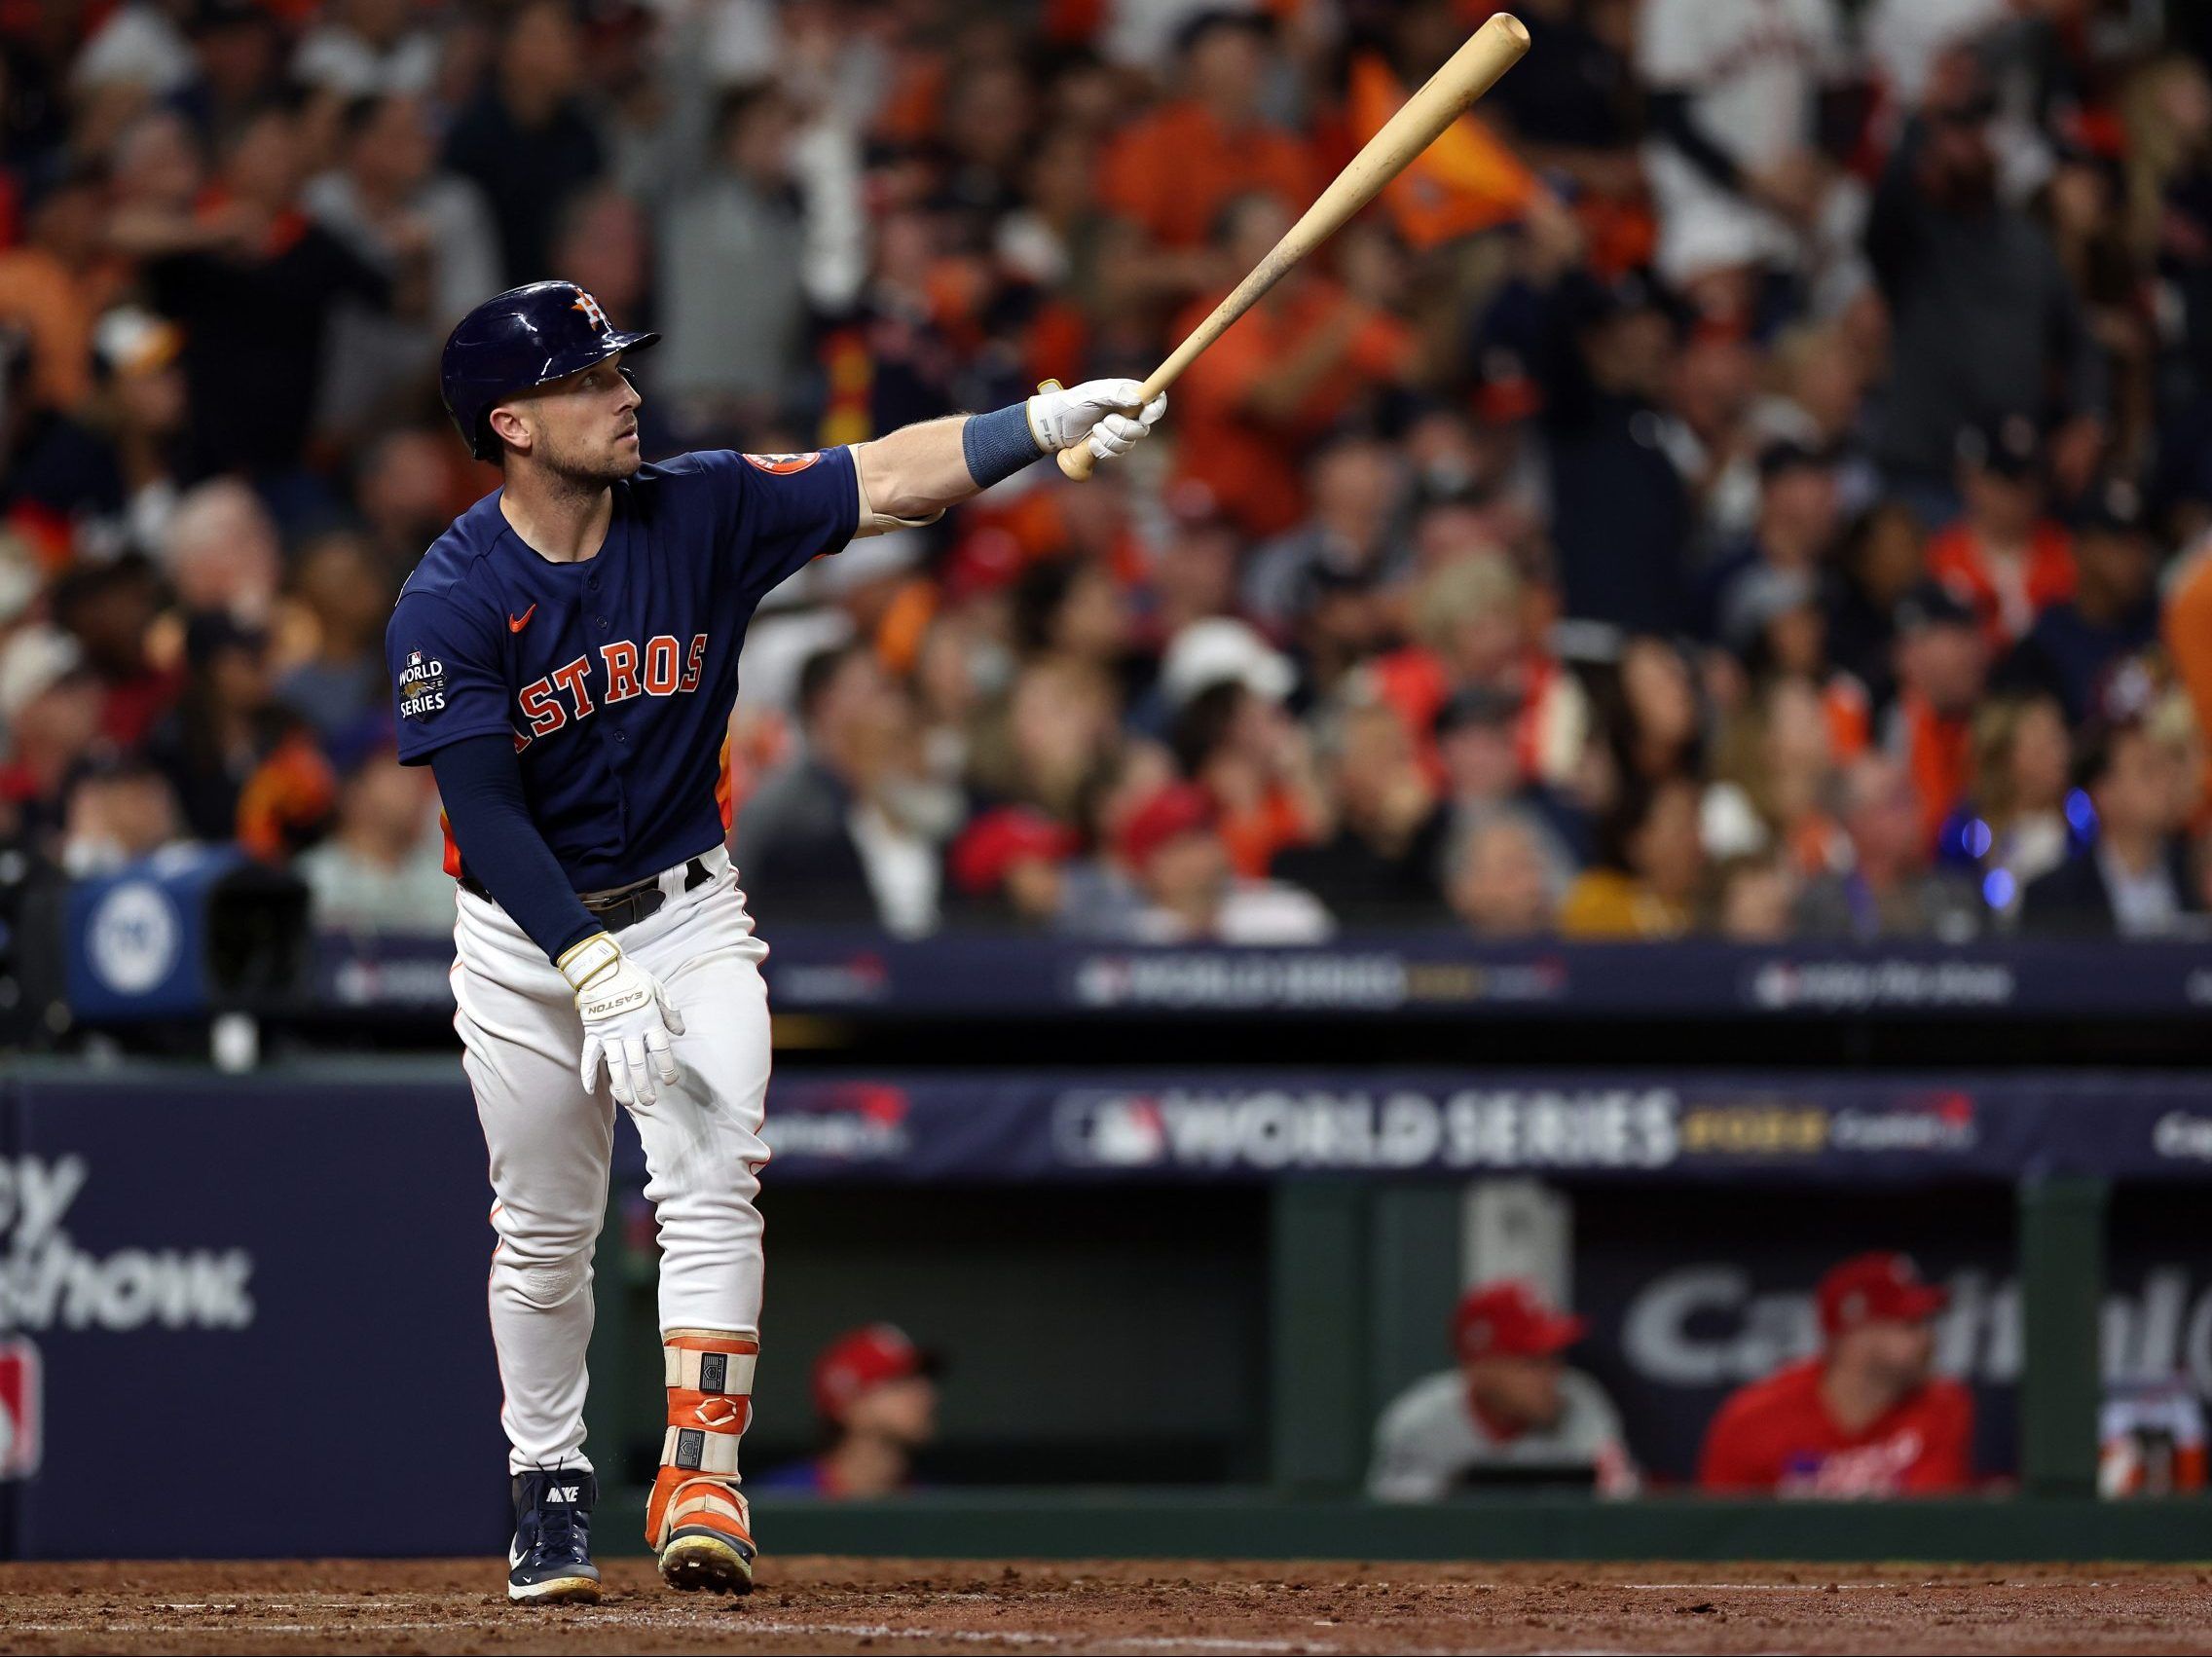 The Astros tie the World Series against the Phillies, taking a 5-2